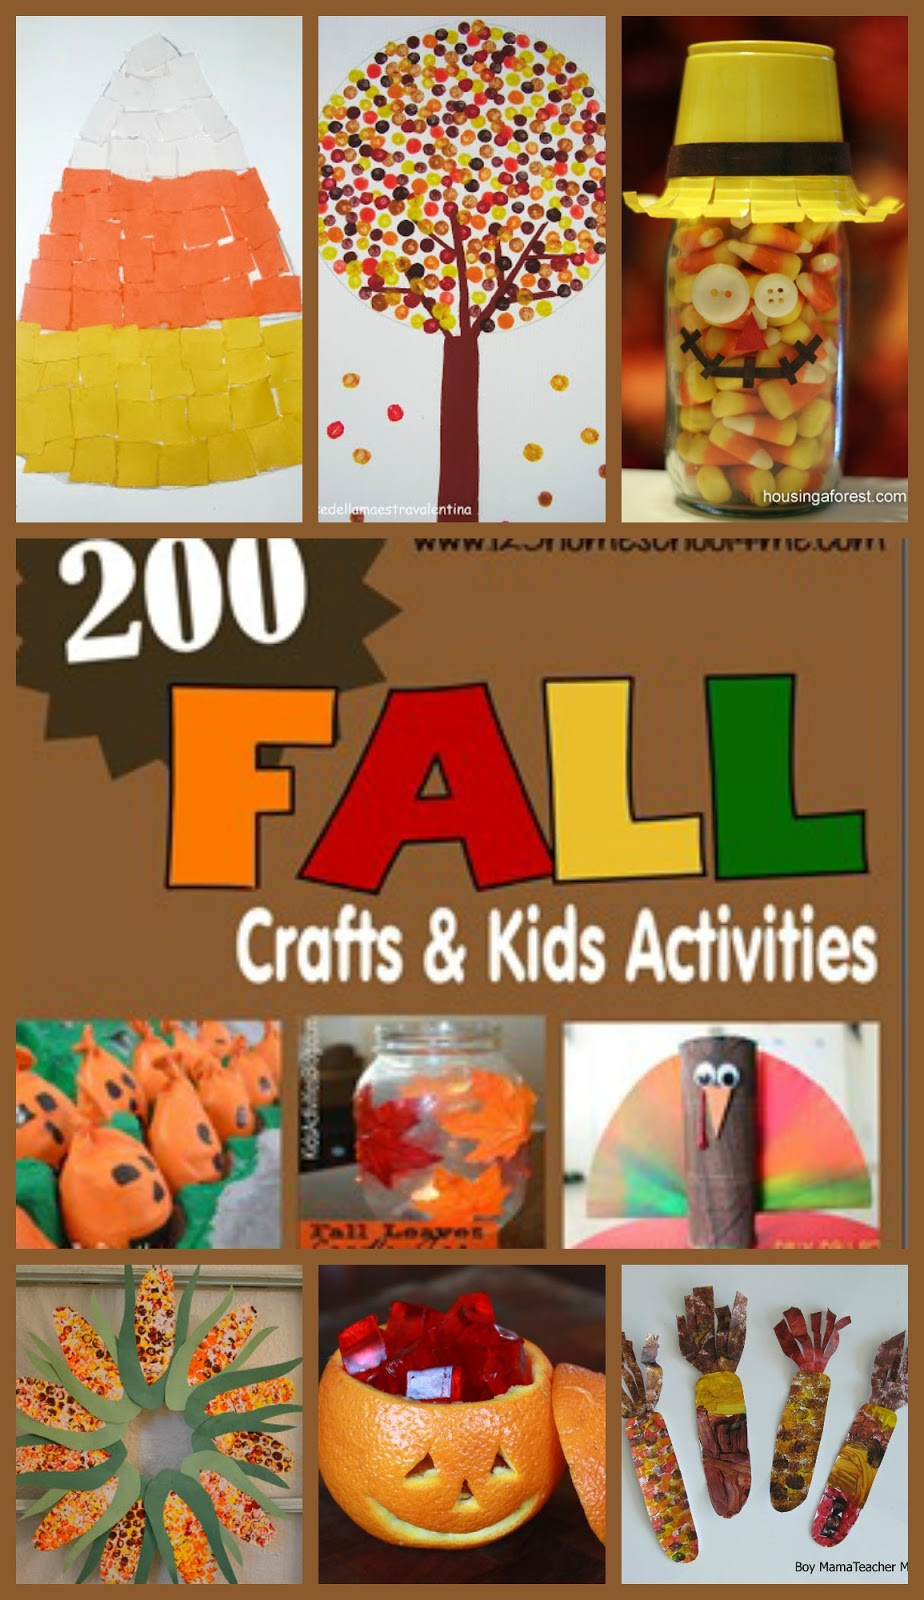 Fall Toddler Craft Ideas
 200 Fall Crafts Kids Activities Printables and Snack Ideas